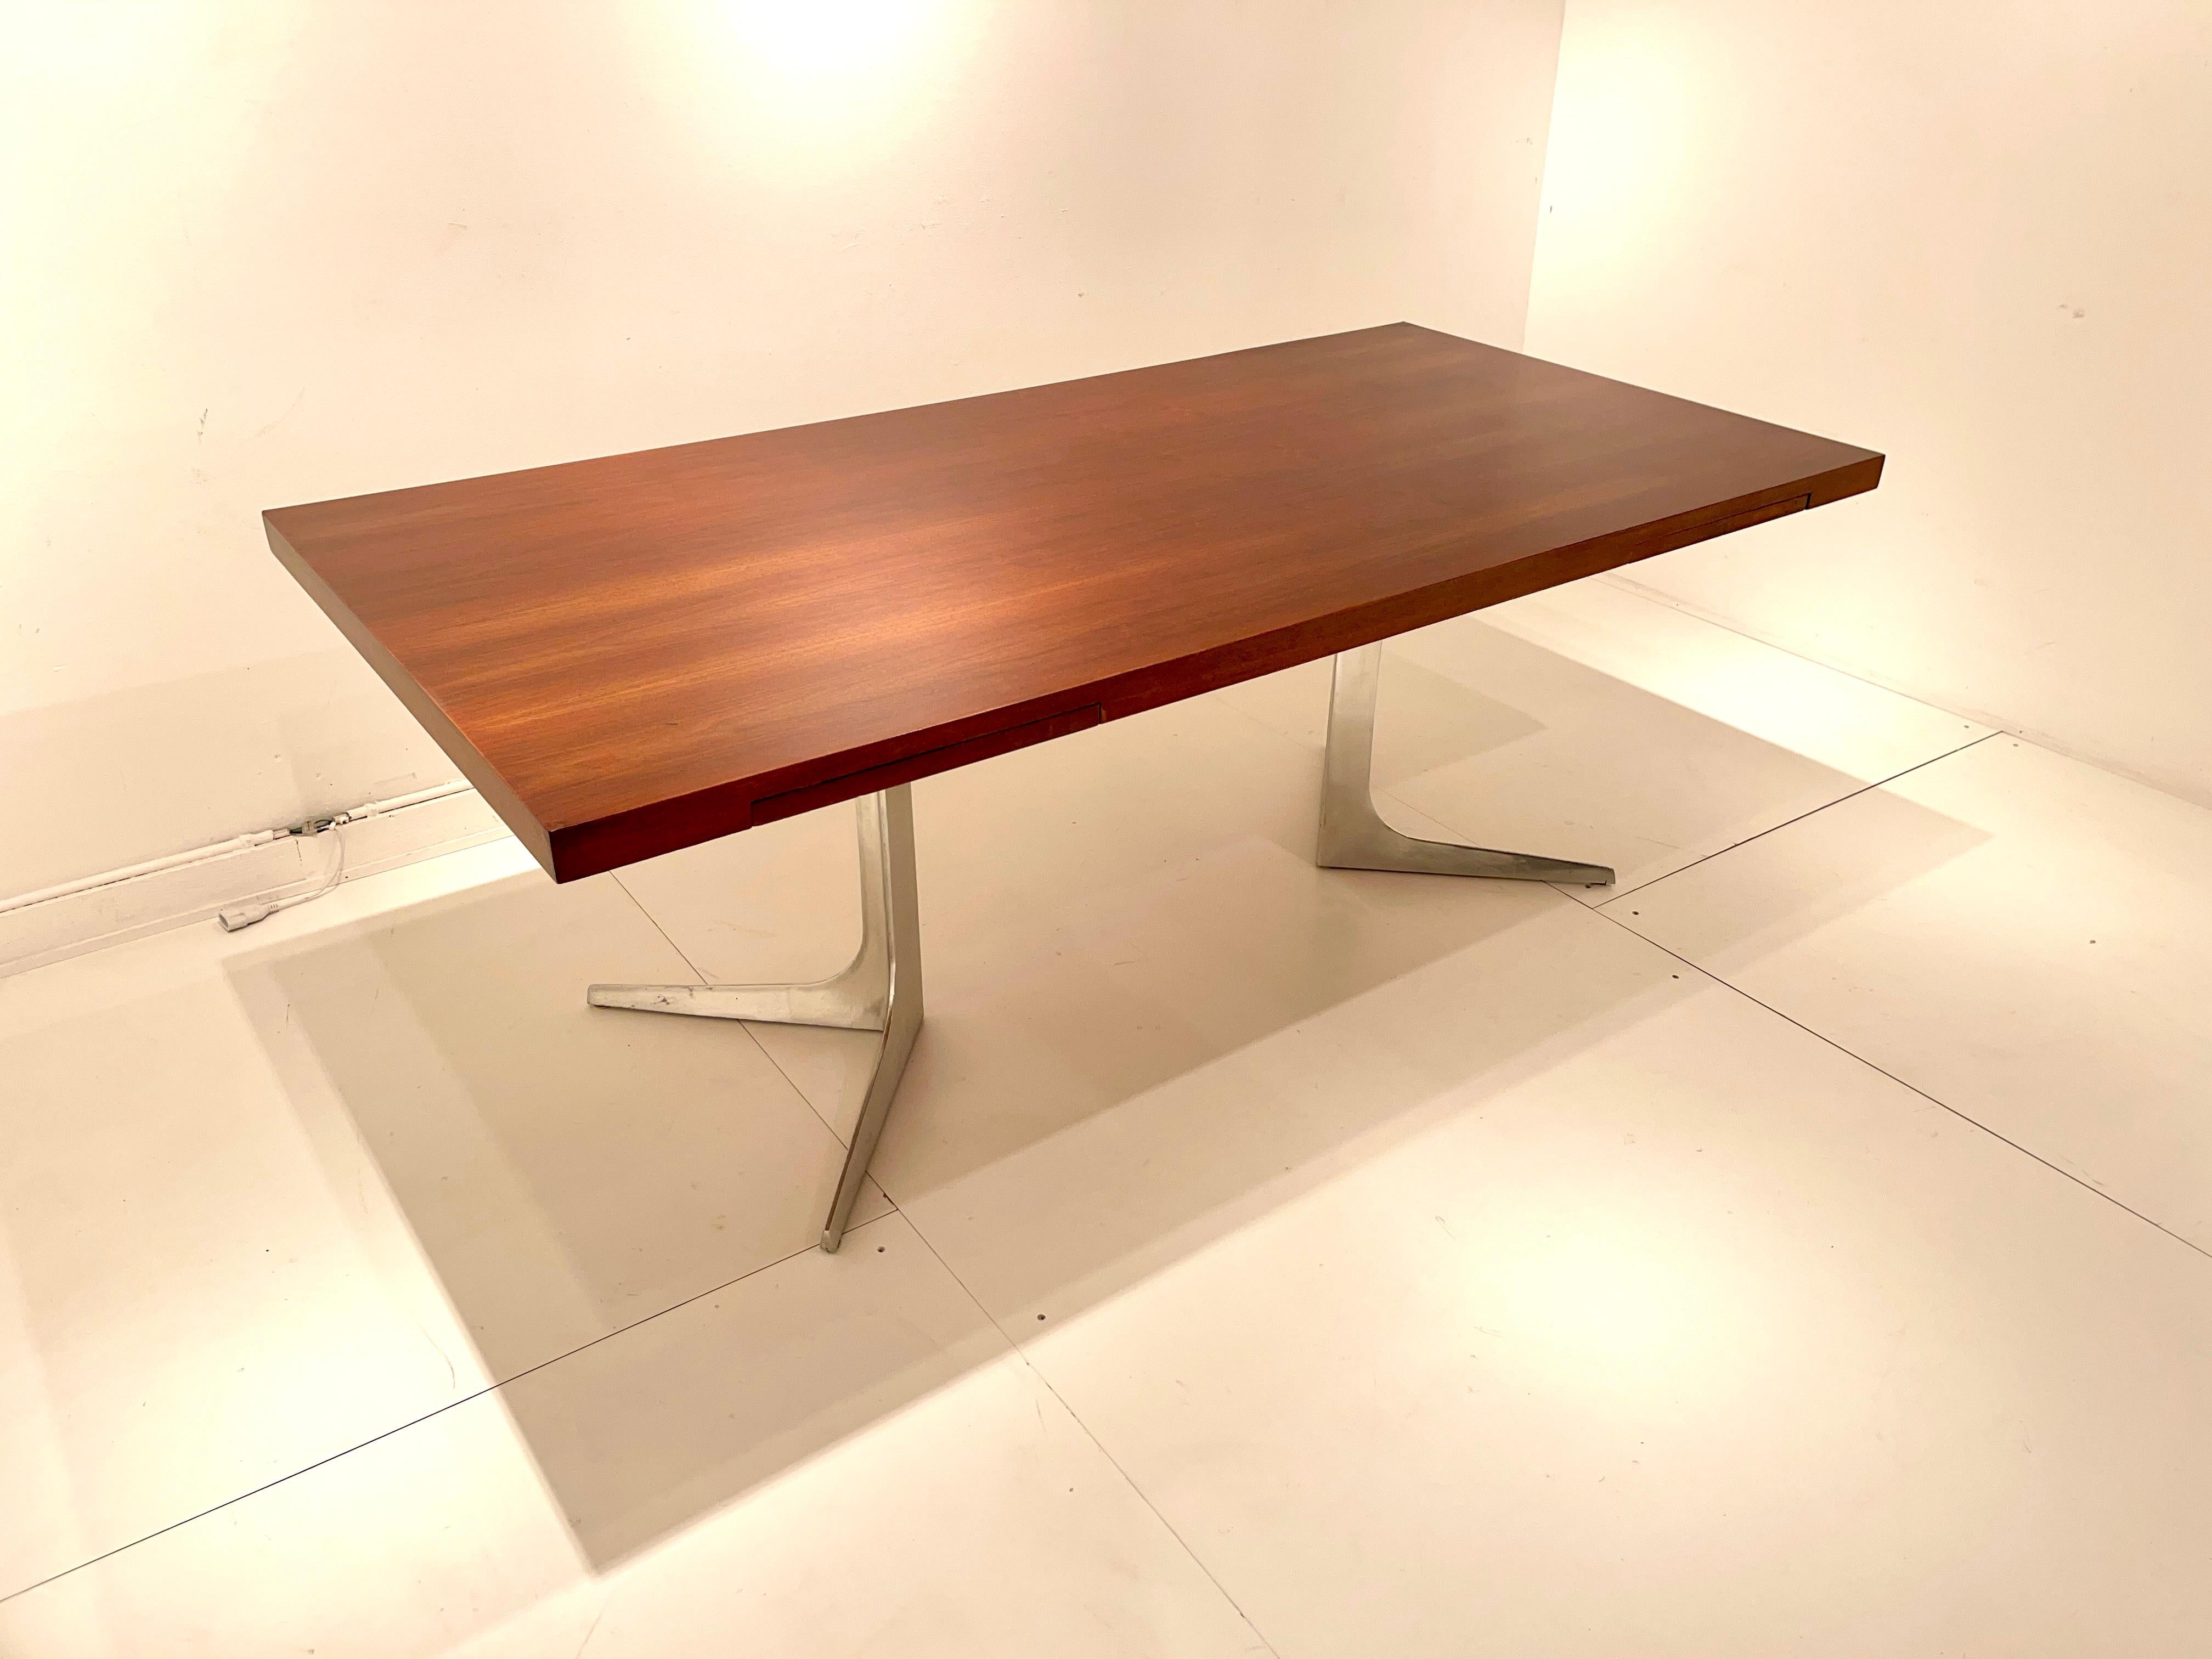 Wonderfull minimalist desk By Herbert Hirche, manufactured by Christian Holzäpfel in 1967.
Original condition.

Born in Görlitz Herbert Hirche moved to Berlin to study at the renowned Bauhaus School in 1932 and was, in fact, one of the last Bauhaus